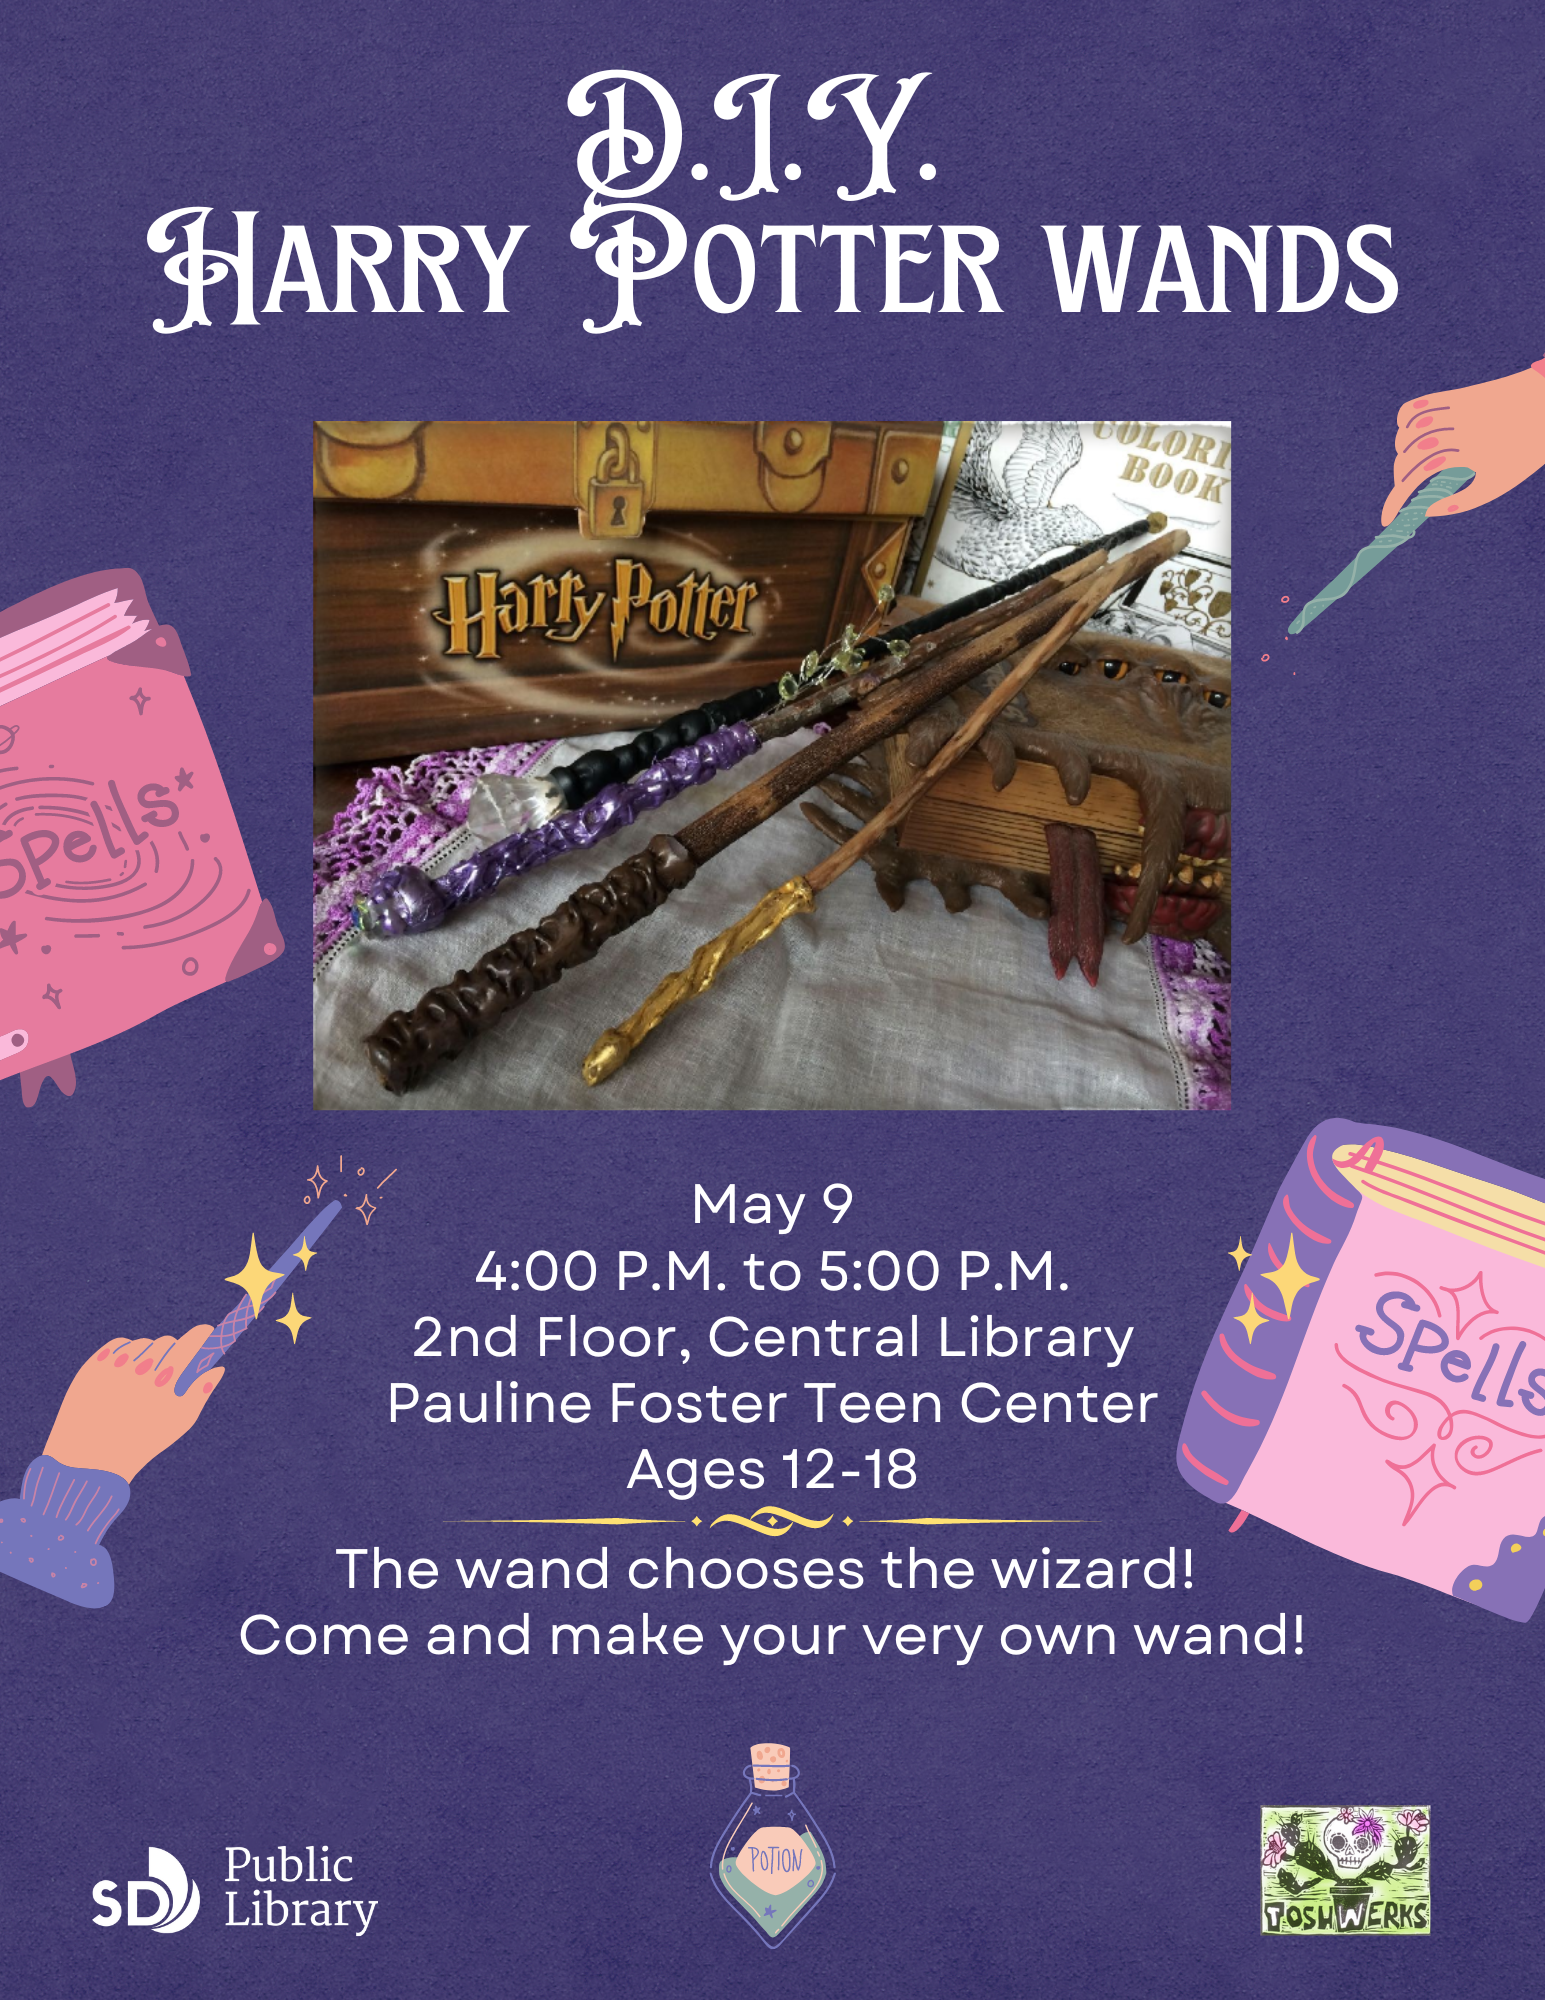 D.I.Y. Harry Potter Wands. May 9, 4 to 5 P.M. 2nd Floor, Central Library. Pauline Foster Teen Center. Ages 12-18. The wand chooses the wizard! Come and make your very own wand!